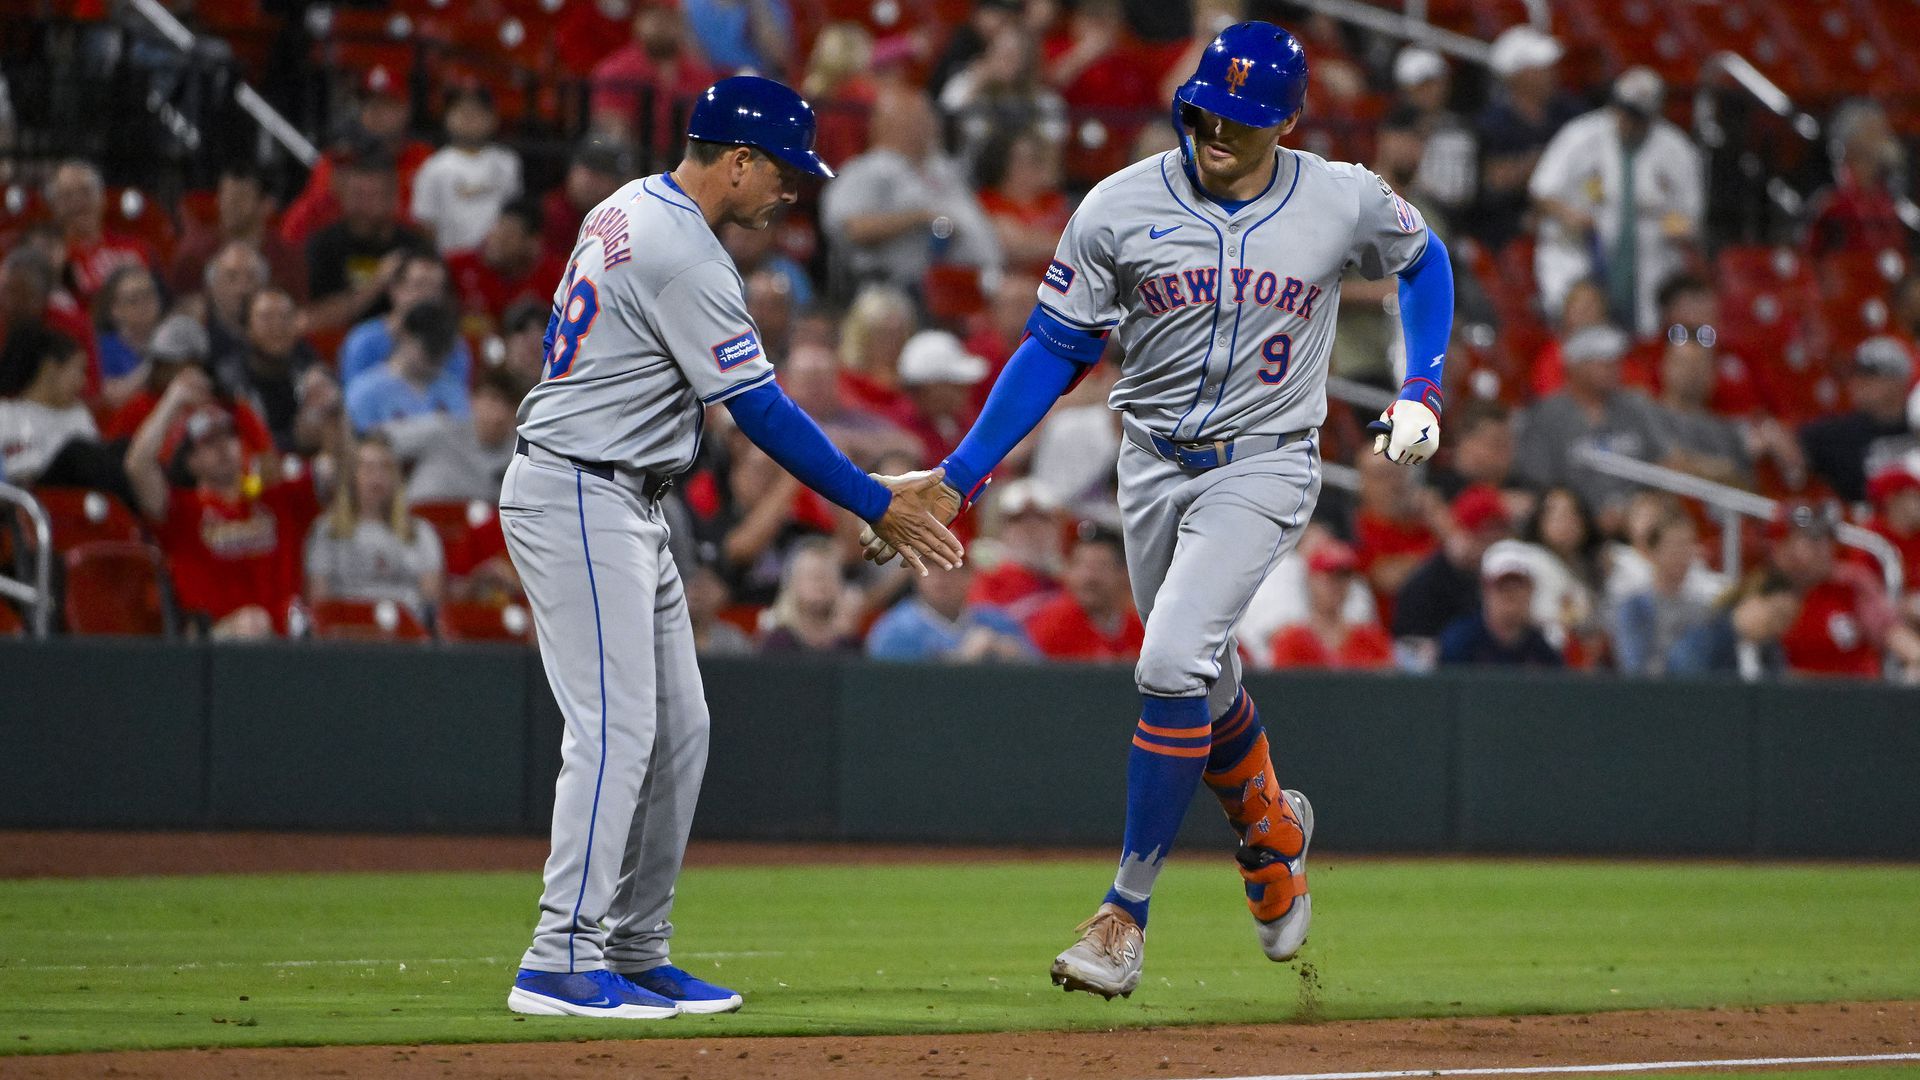 mets 4, cardinals 3: just like you drew it up